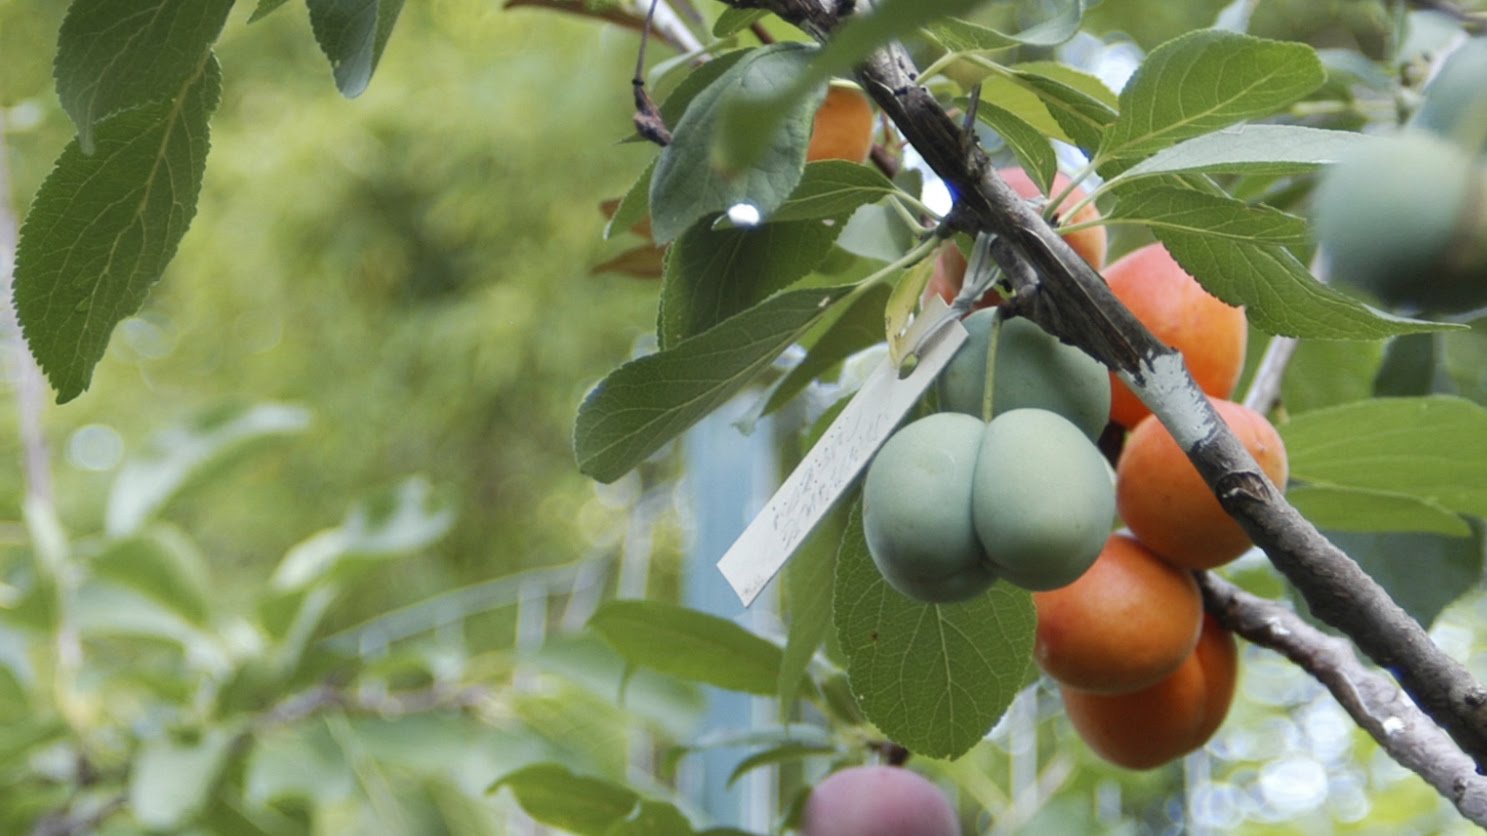 This Amazing Tree Grows 40 Kinds of Fruit